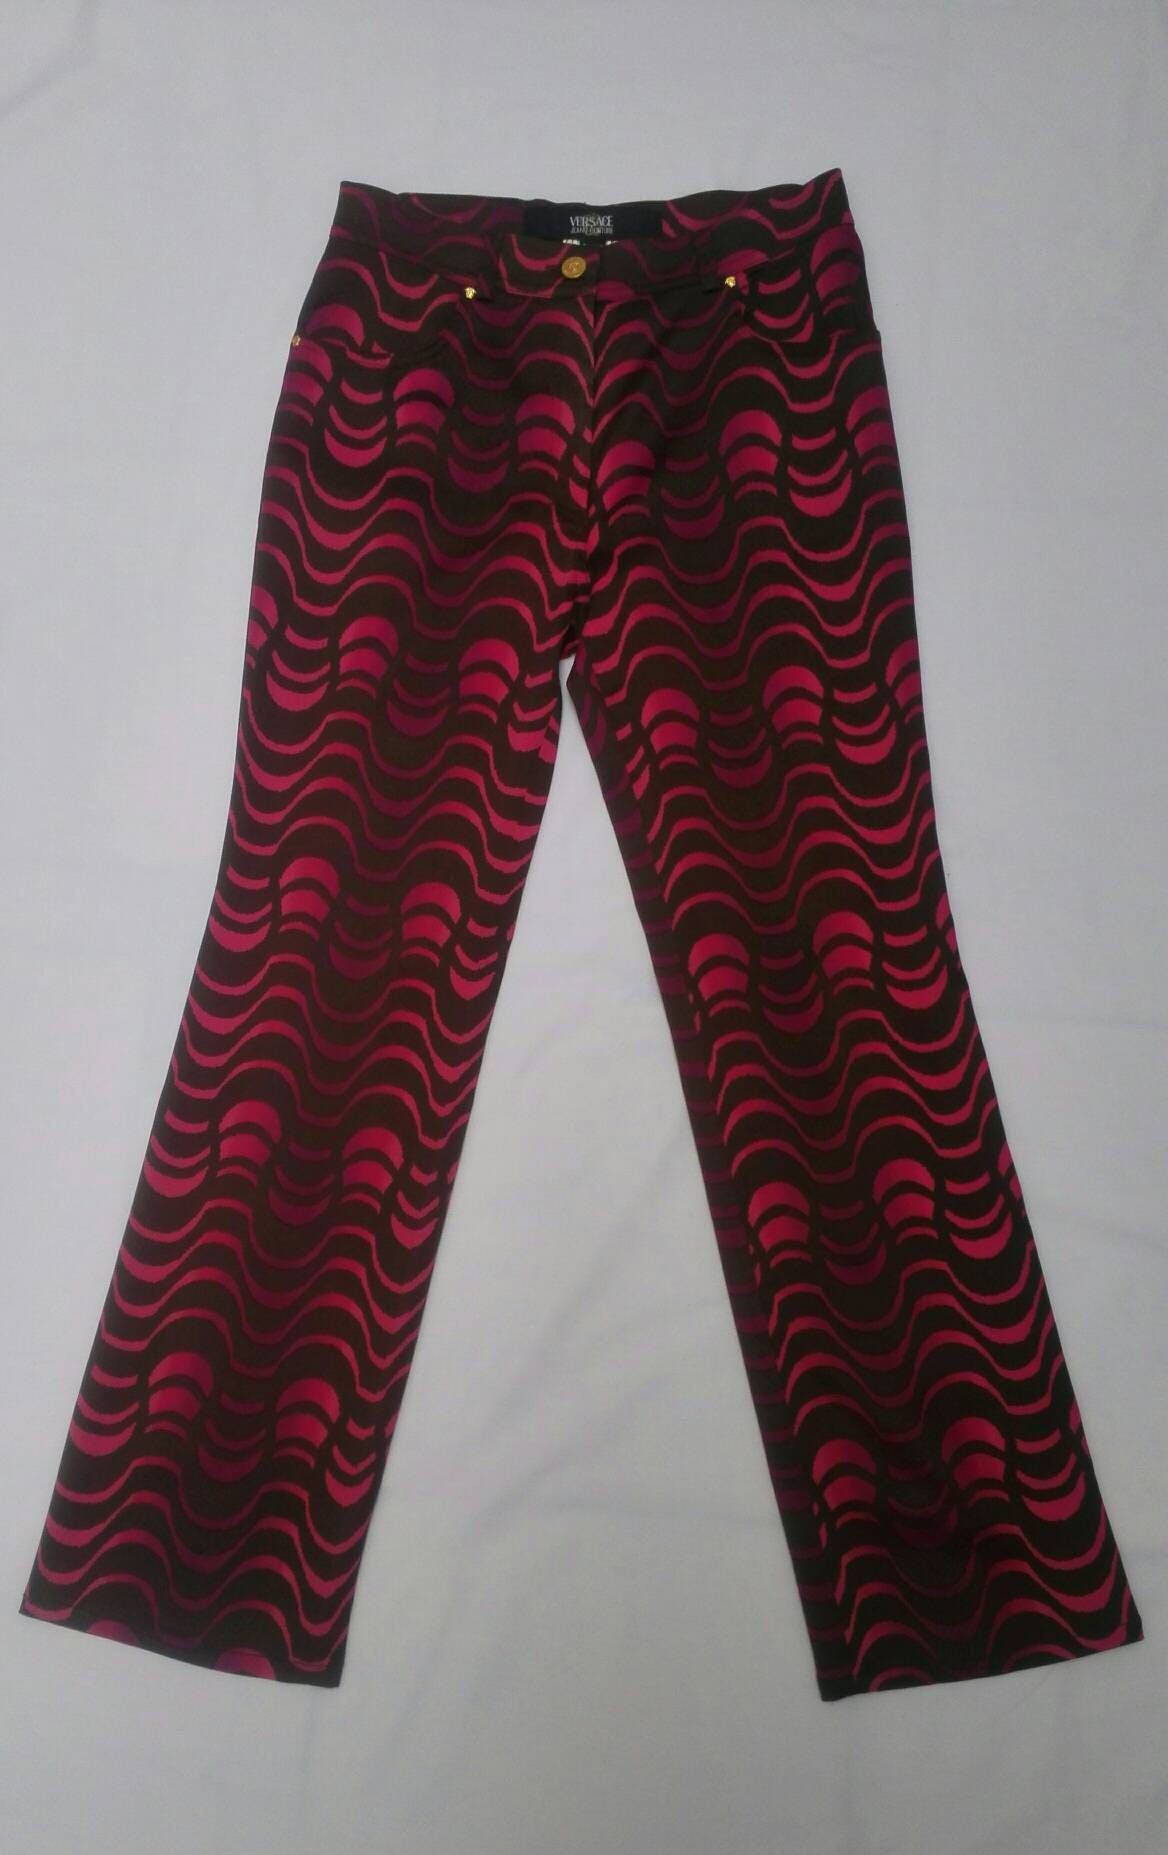 VERSACE JEANS COUTURE vintage 90s psychedelic print stretch pants